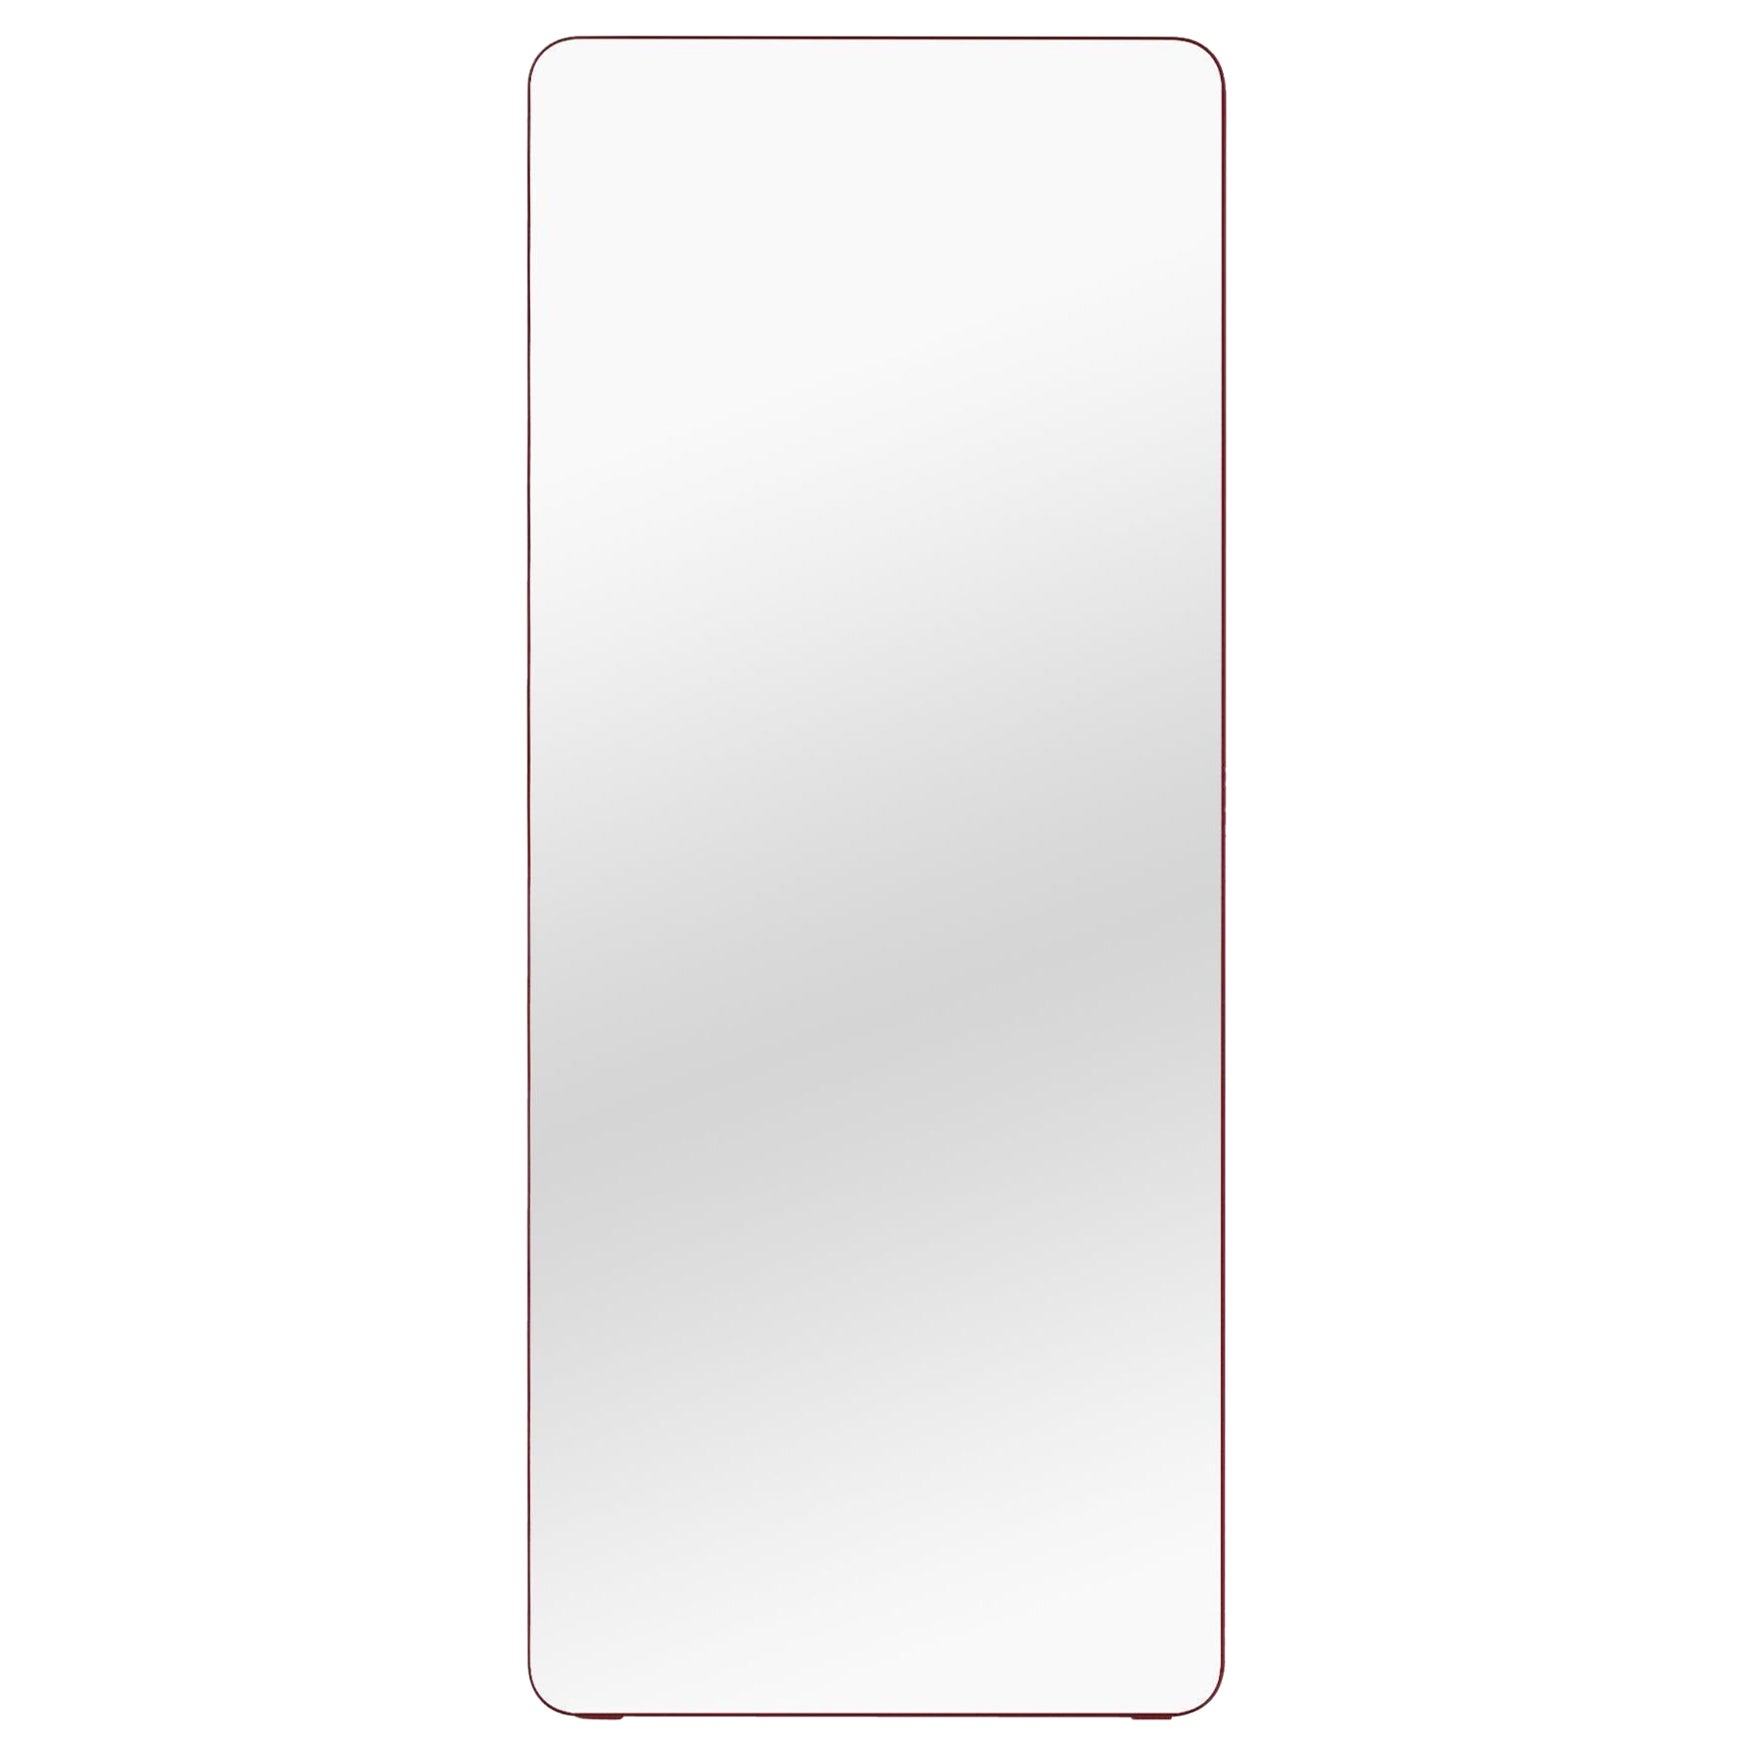 Contemporary Mirror 'Loveself 05' by Oitoproducts, Dark Red Frame For Sale